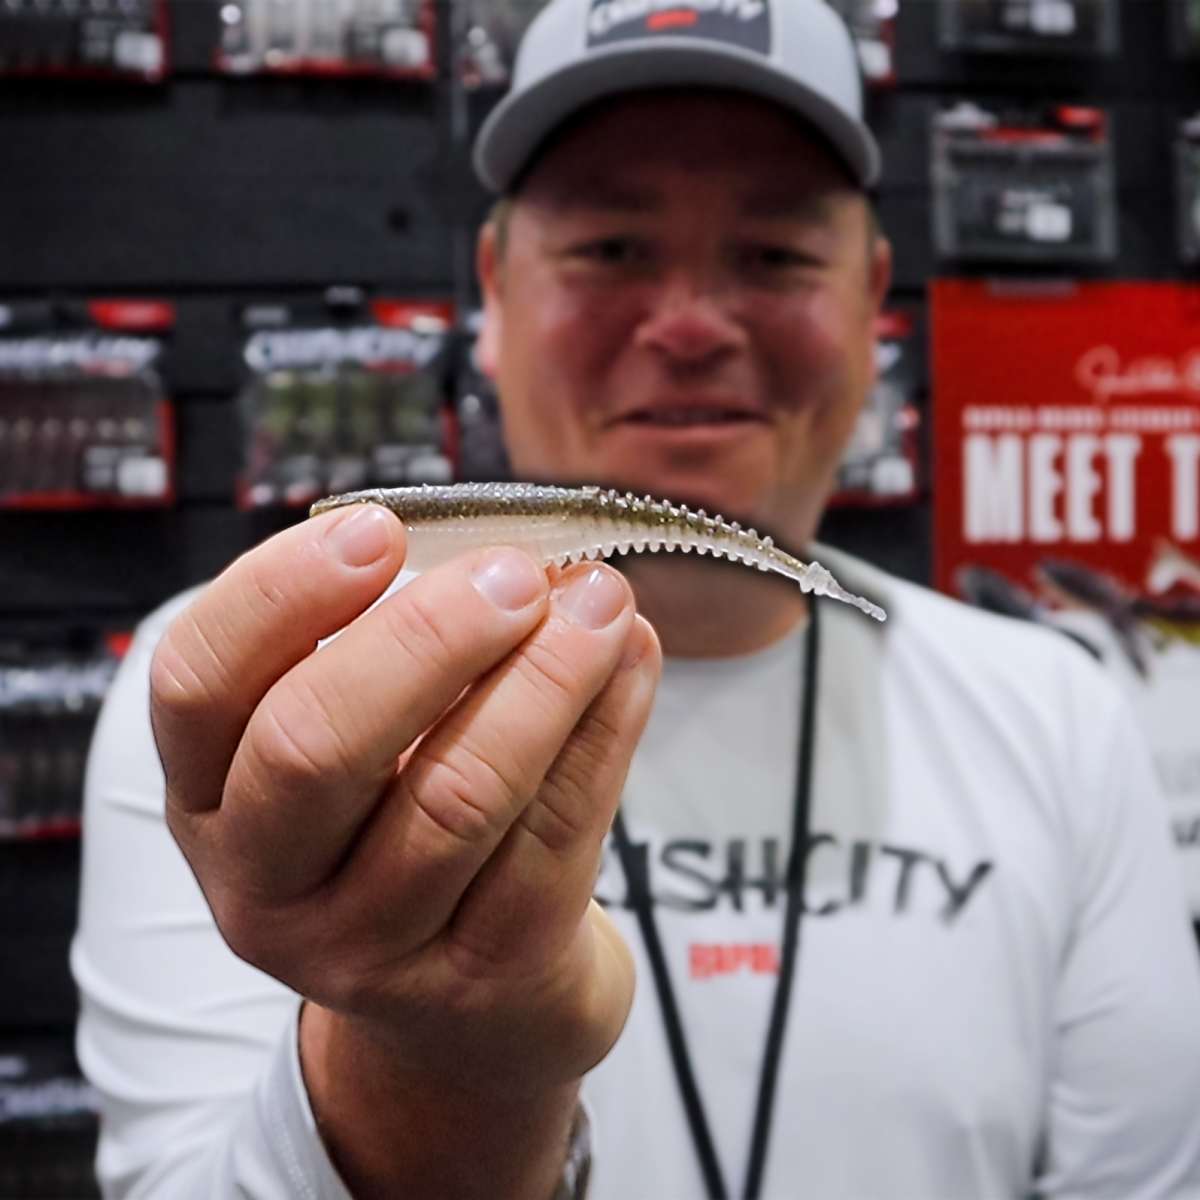 TOP 5 SELLING Bass Pro Shops Lures! 